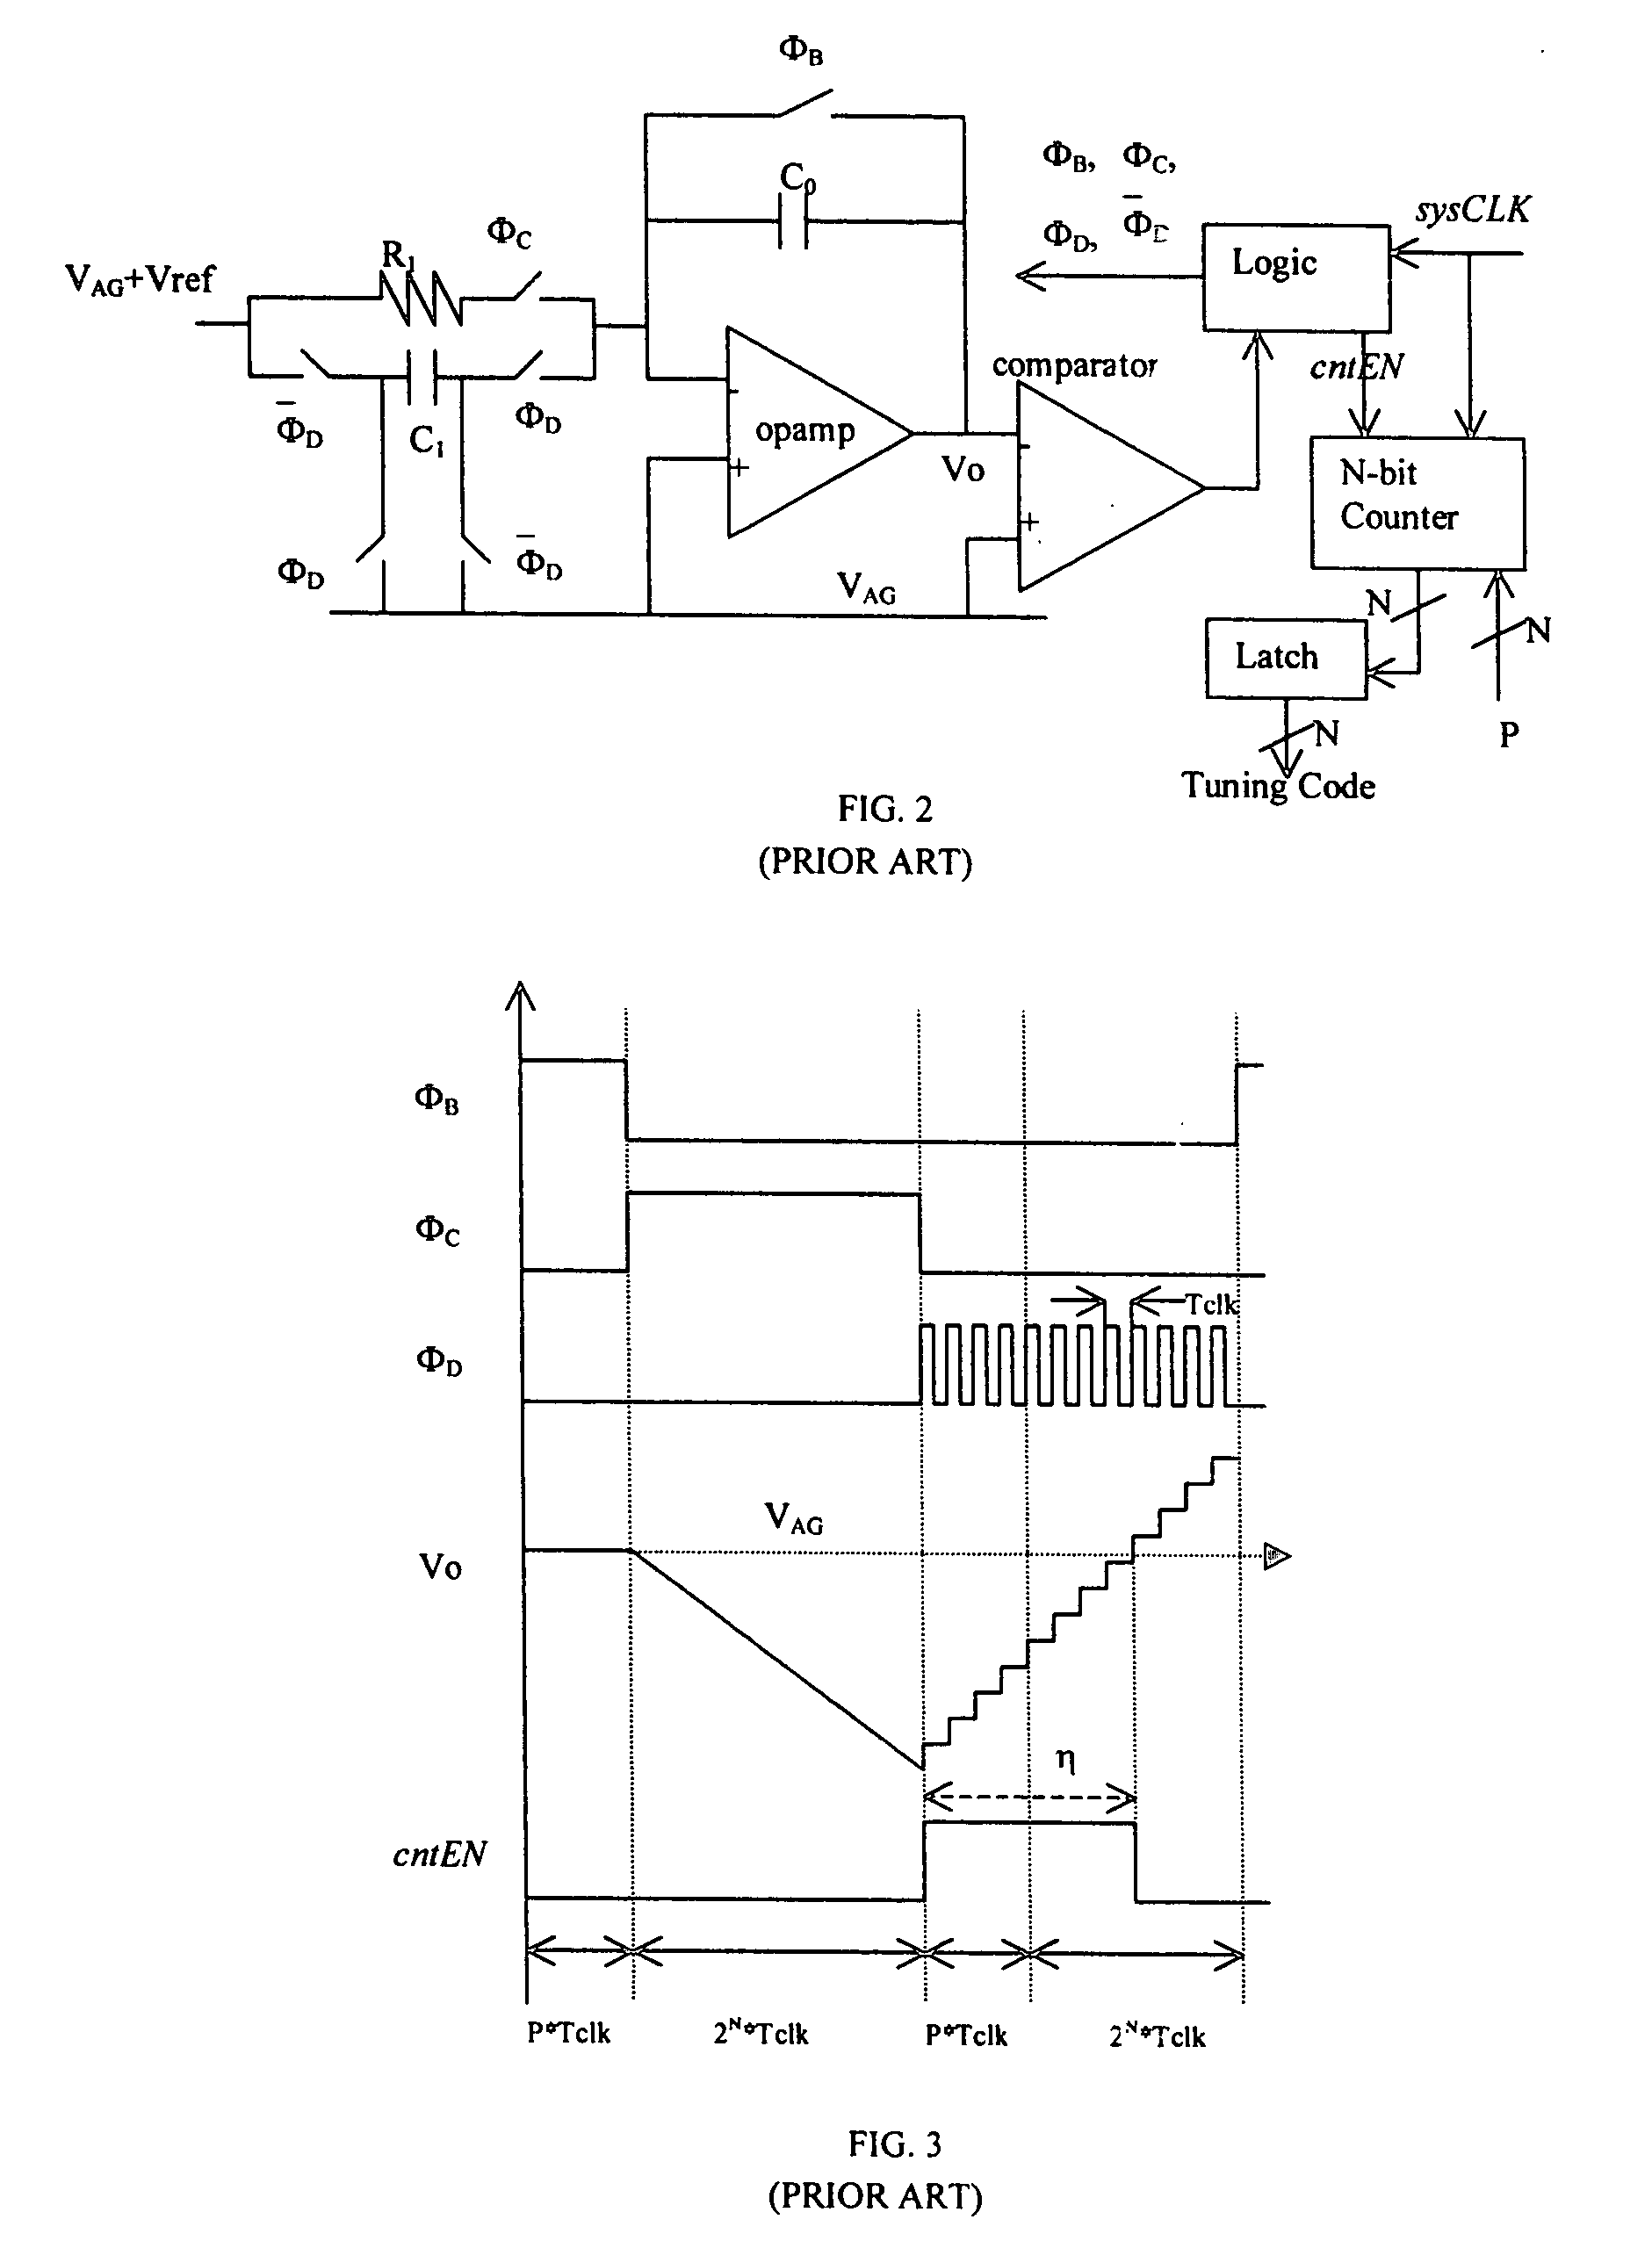 Variable rate RC calibration circuit with filter cut-off frequency programmability